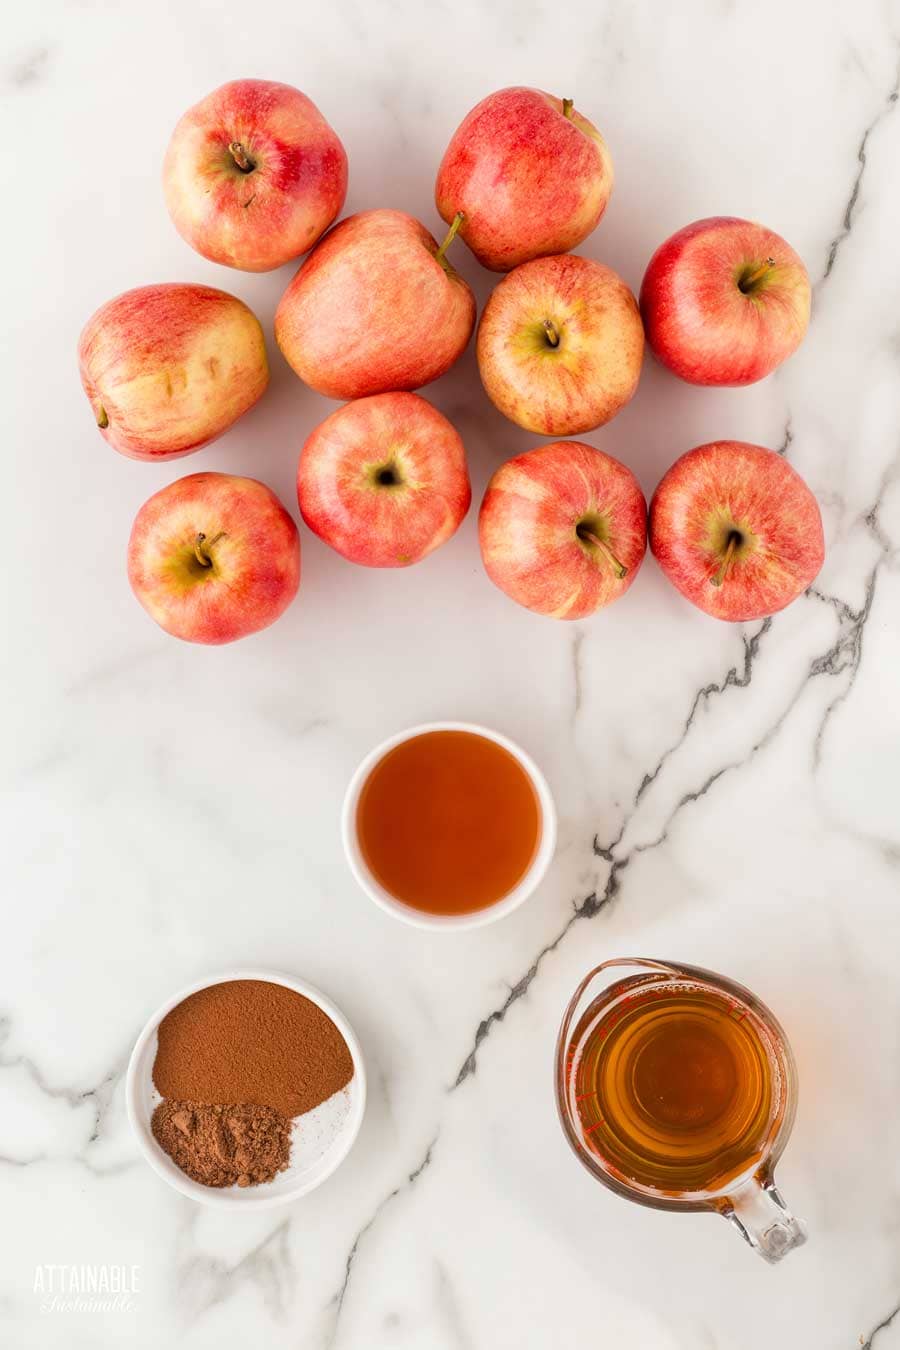 ingredients for making apple butter: red striped apples, apple cider, apple cider vinegar, and spices on a marble background.